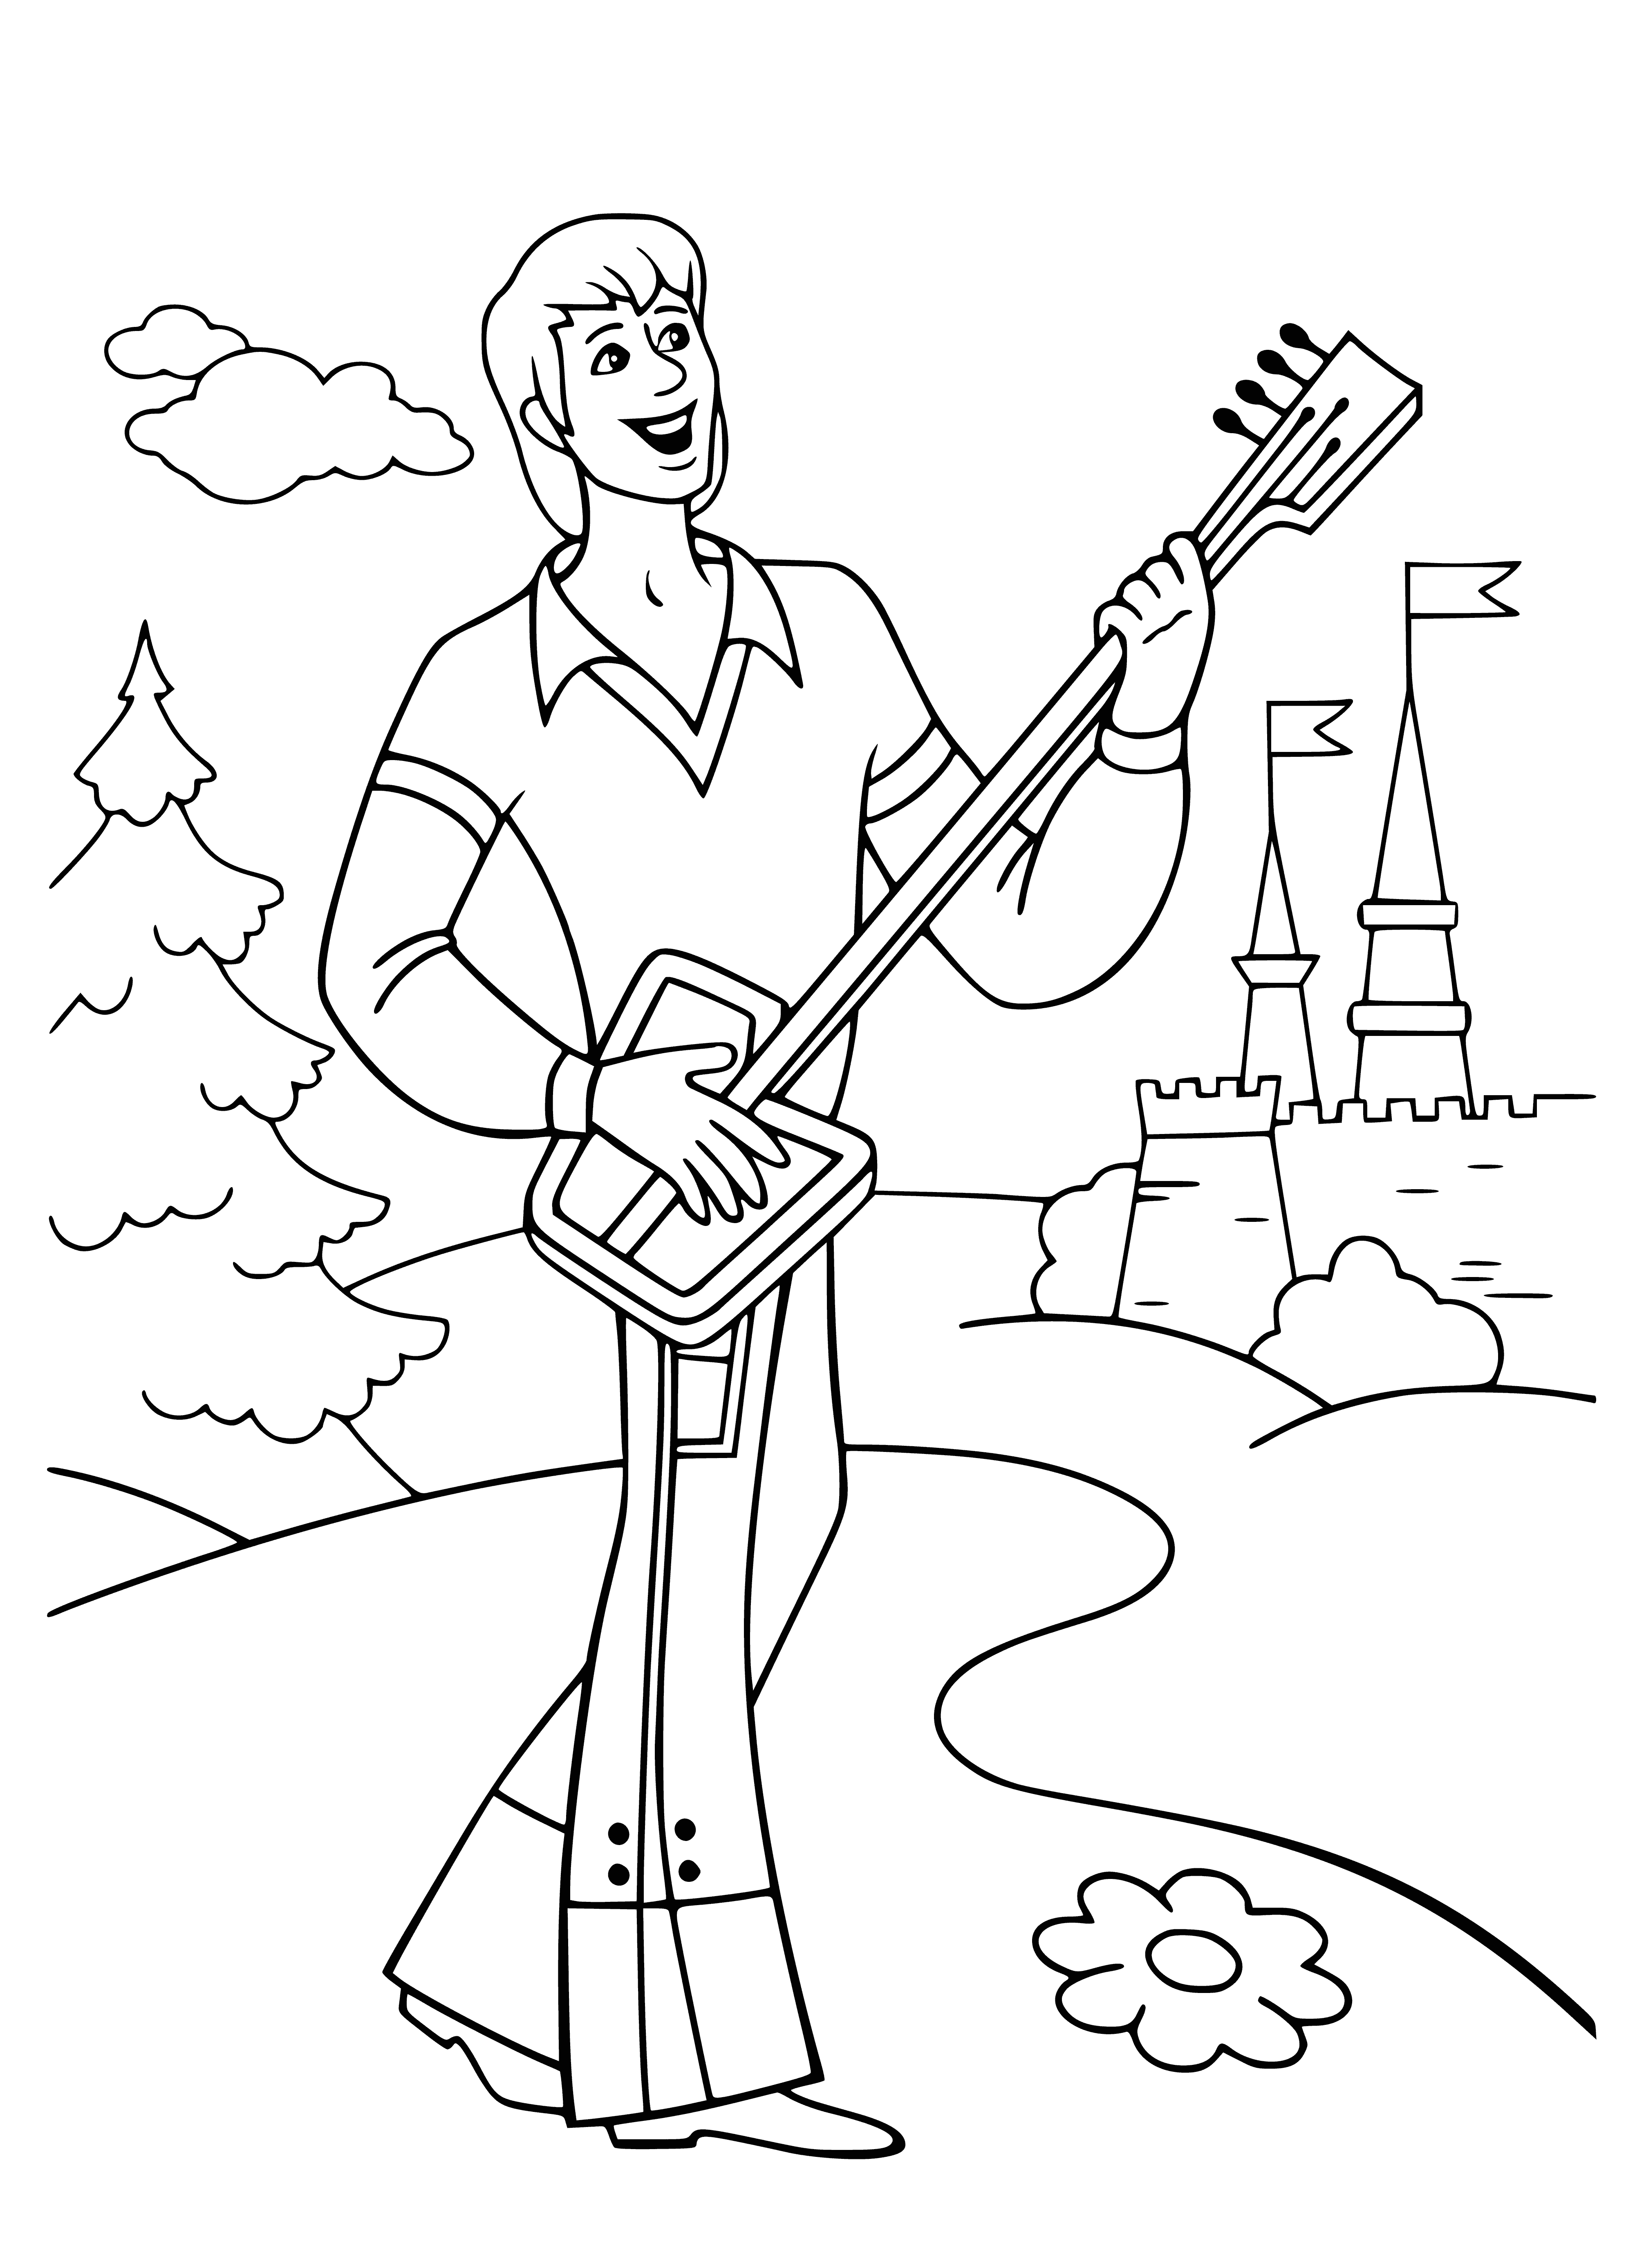 coloring page: The Troubadour leads a lively band of animals - a donkey, dog, cat and rooster - playing instruments and singing.